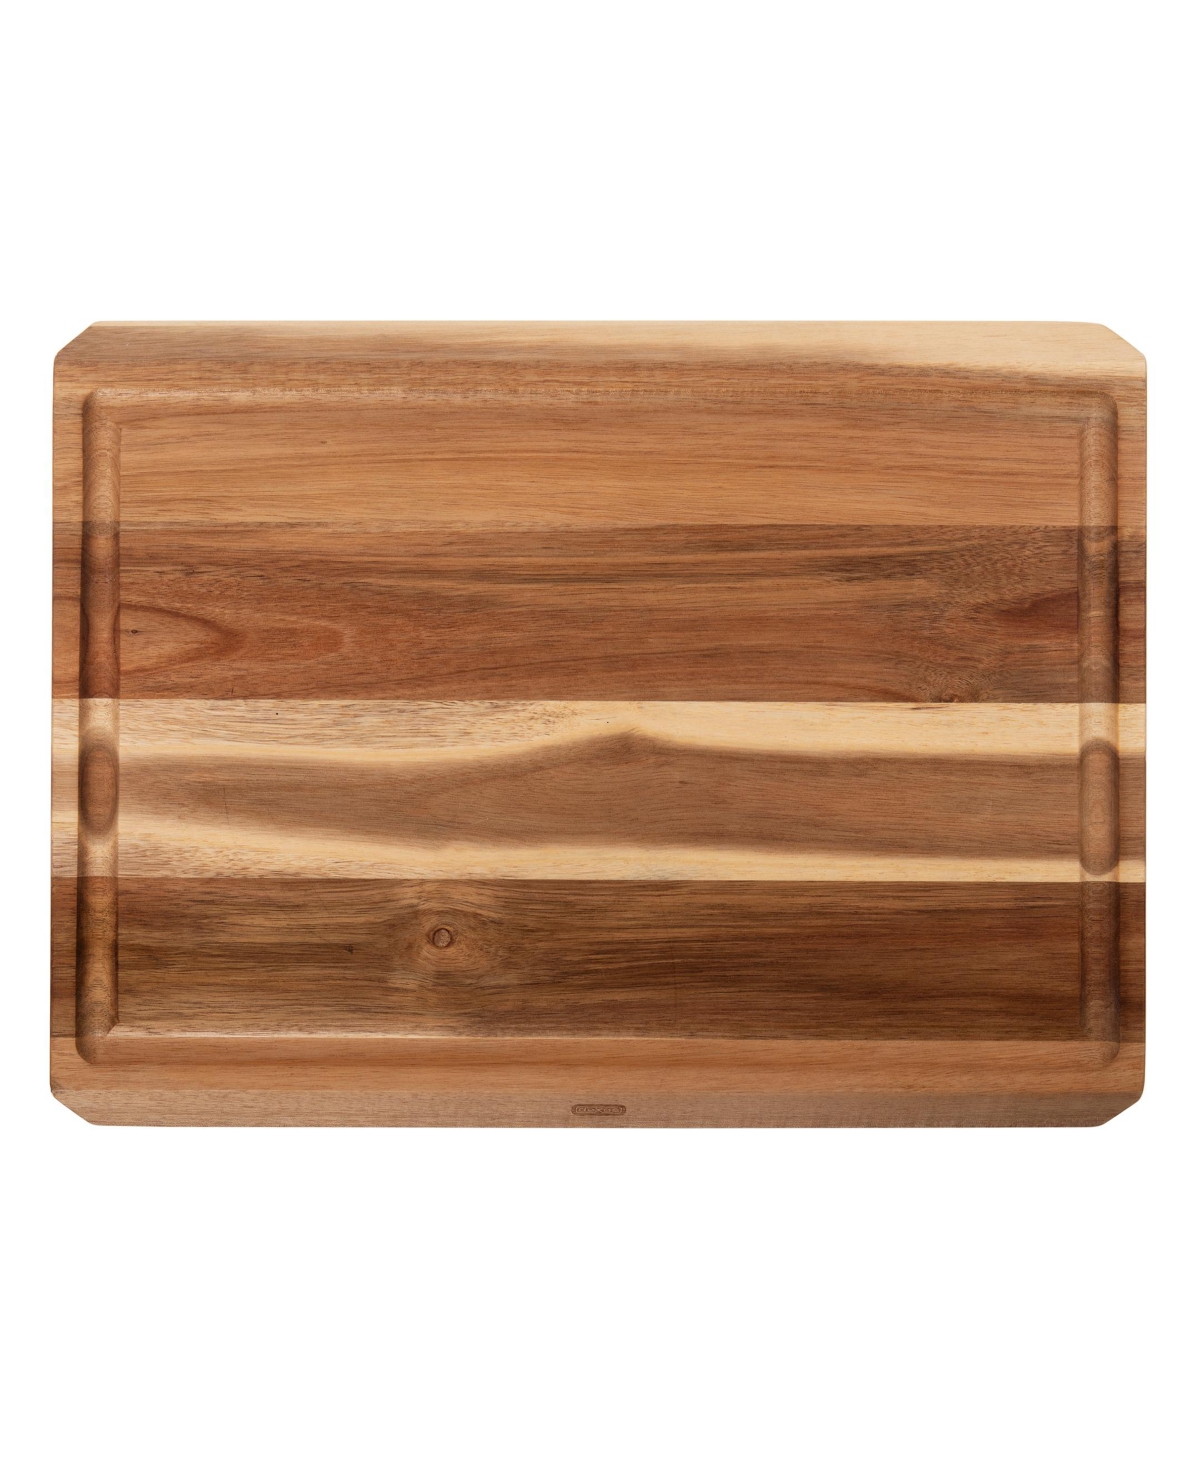 Dexas Acacia Forty-five Cutting Board With Well